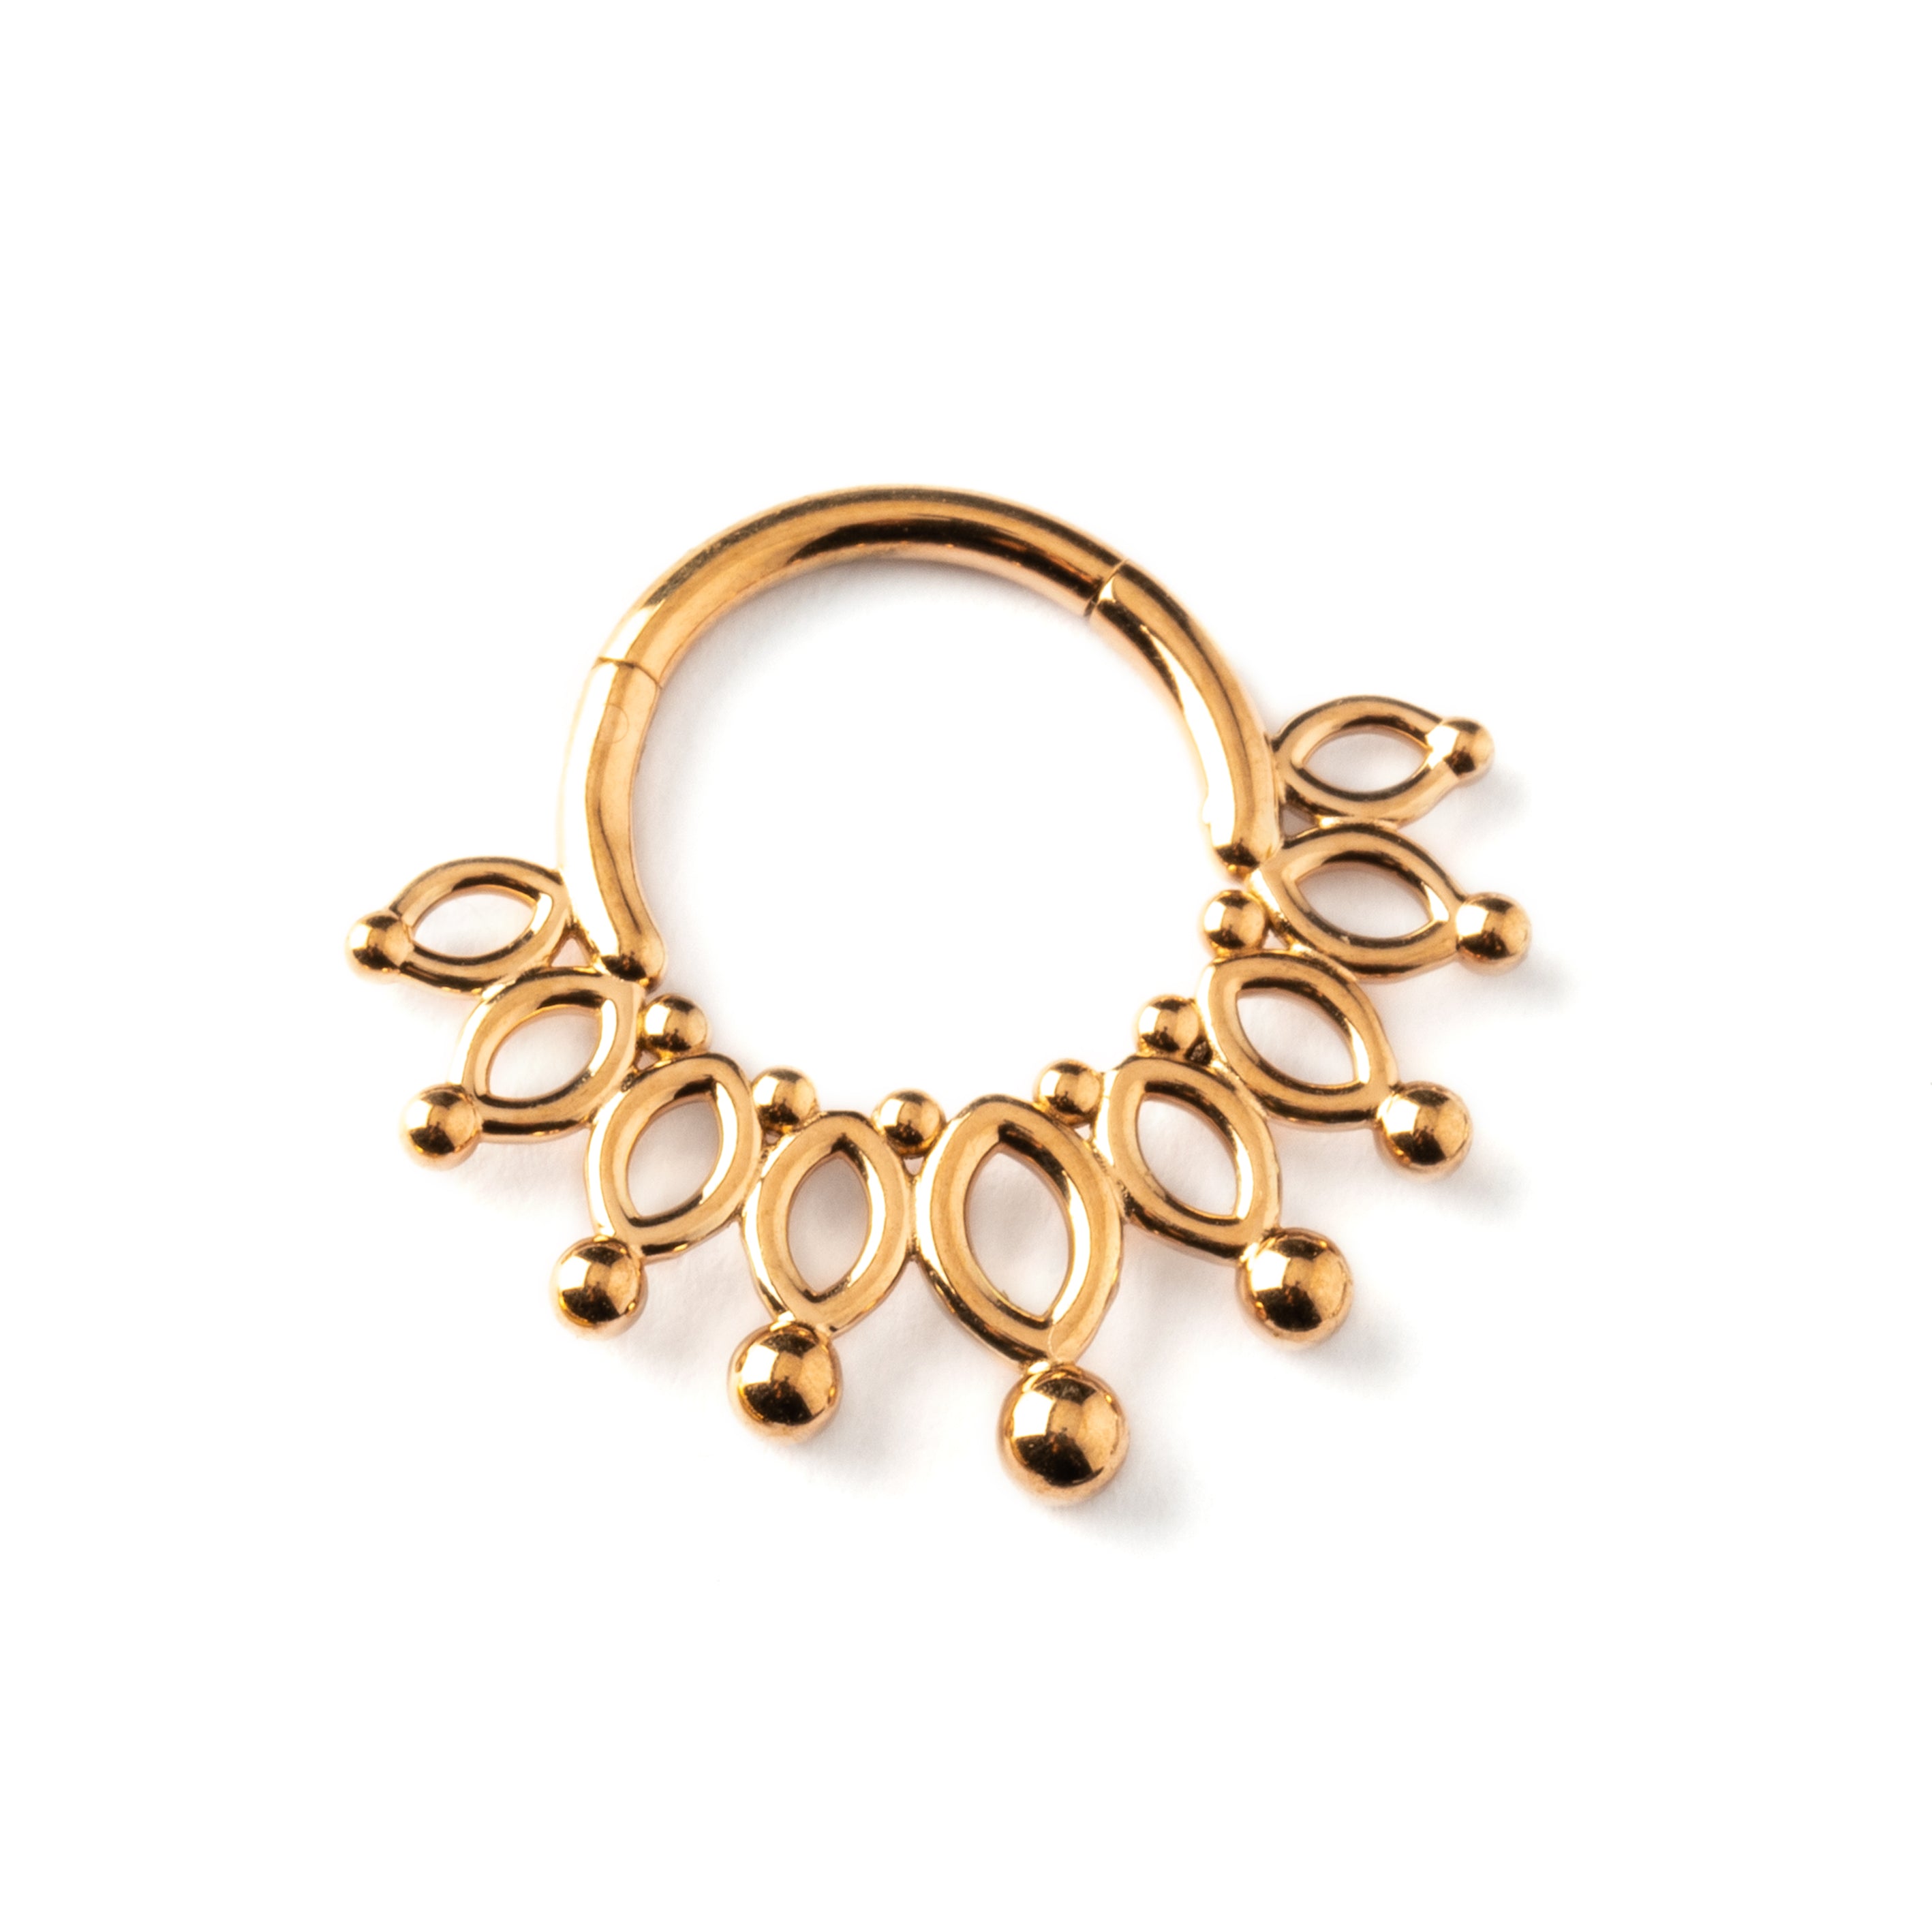 Anastasia rose gold surgical steel flower petals septum clicker frontal view